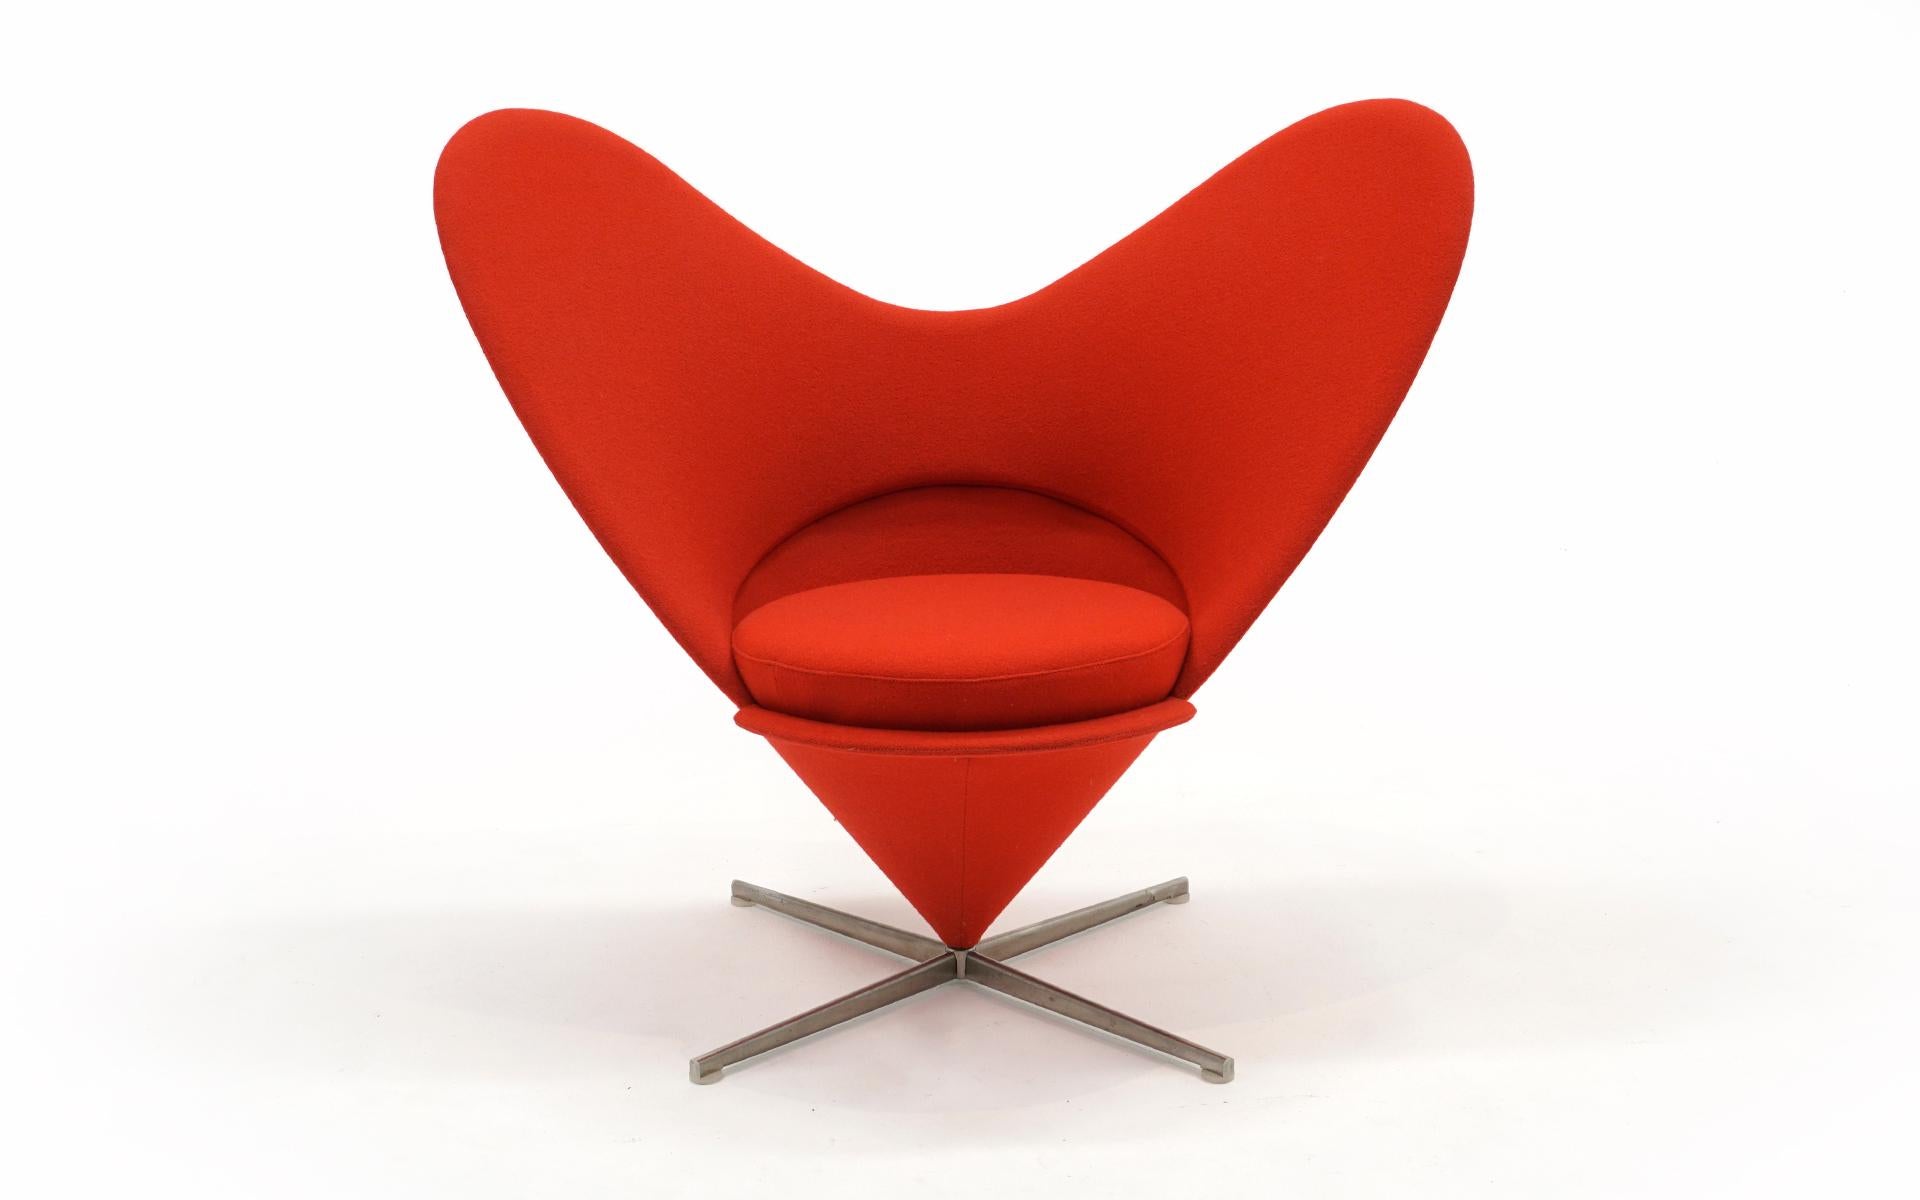 Red Cone heart chair designed by Verner Panton and manufactured by Vitra, Germany. This example is newer production and in great condition with few if any signs of wear. No stains or spots on the fabric. Base may show light scratches. Ready to ship